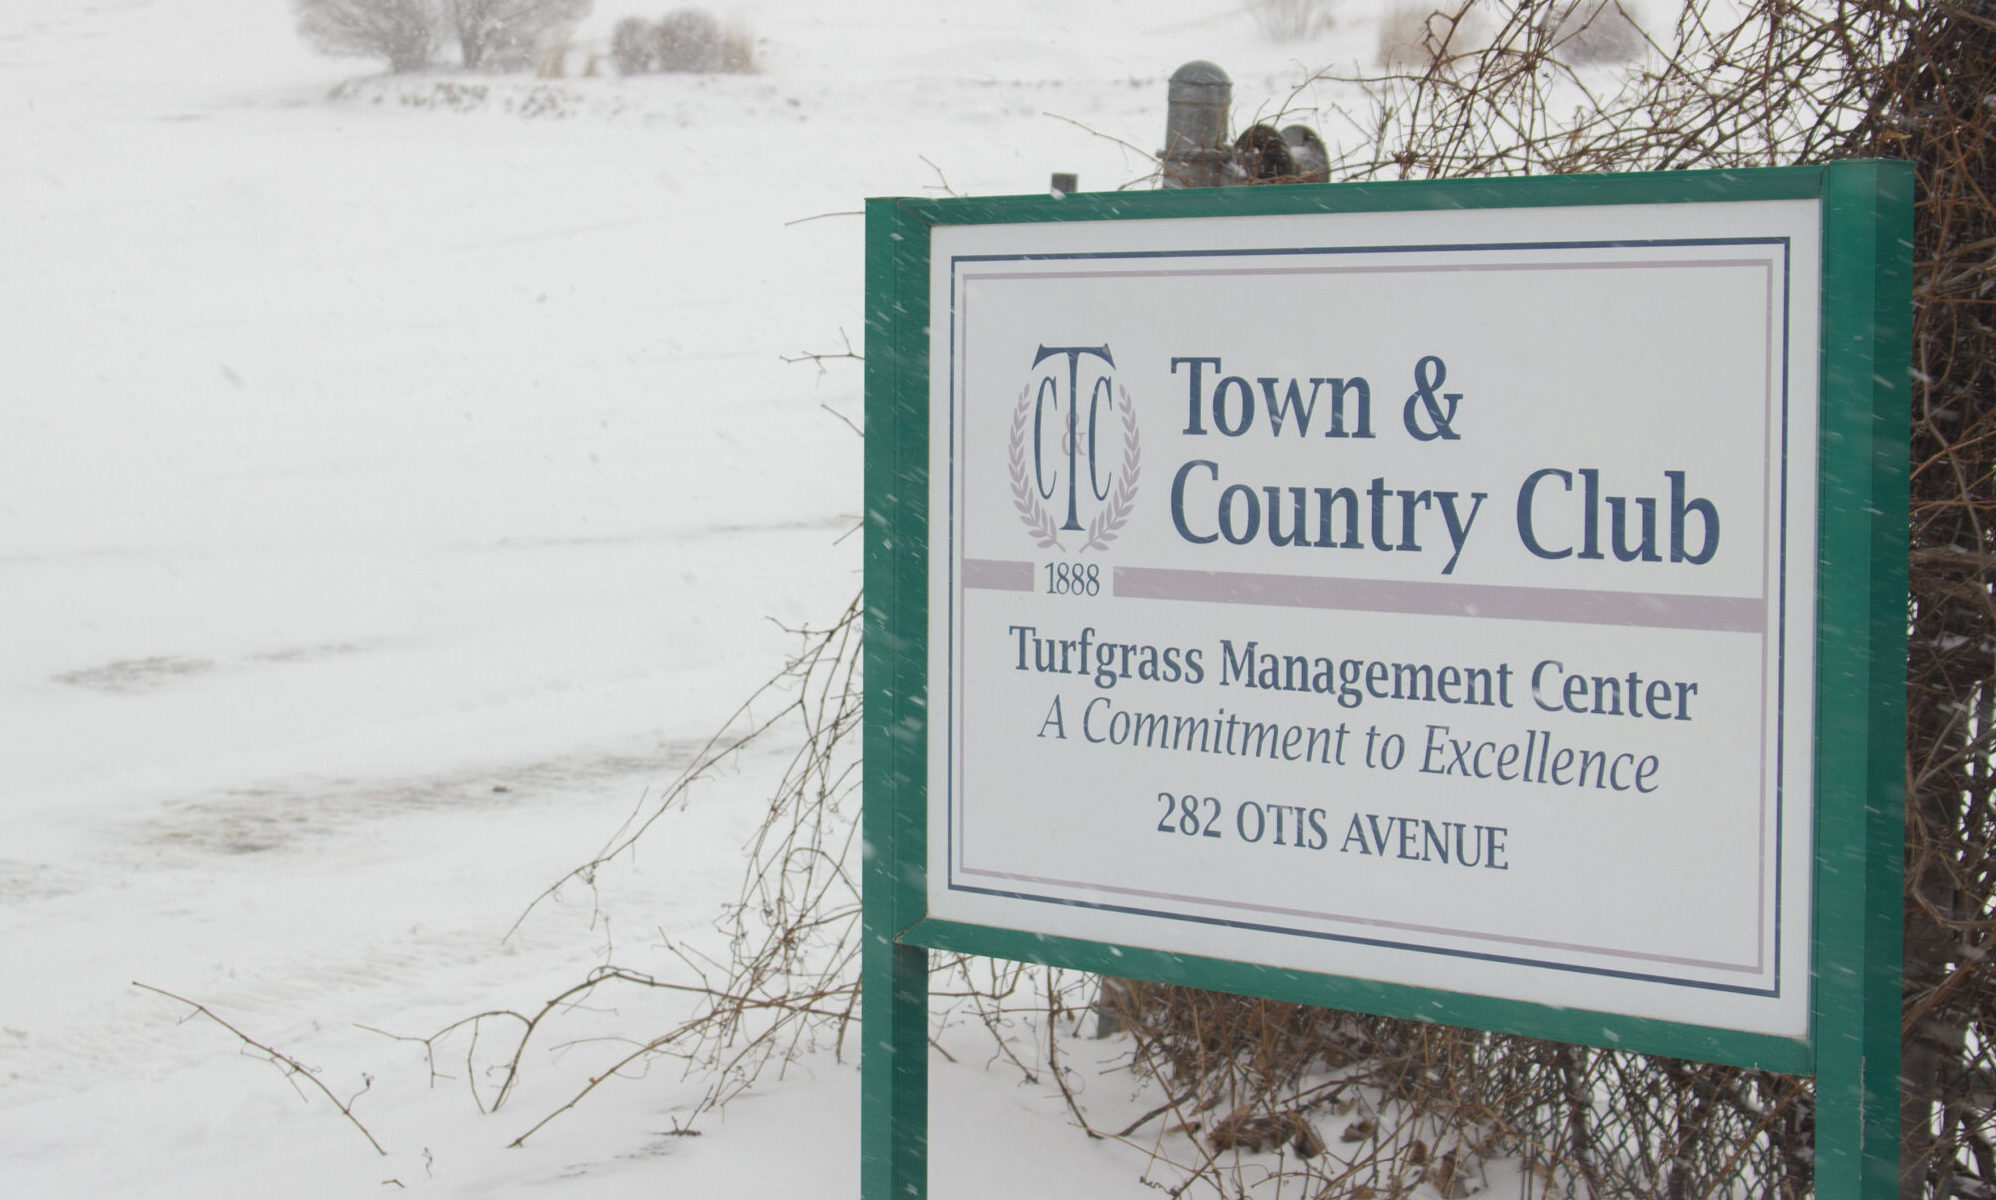 Town & Country Club rejects St. Thomas' offer to buy golf course for $61.4M  - Bring Me The News